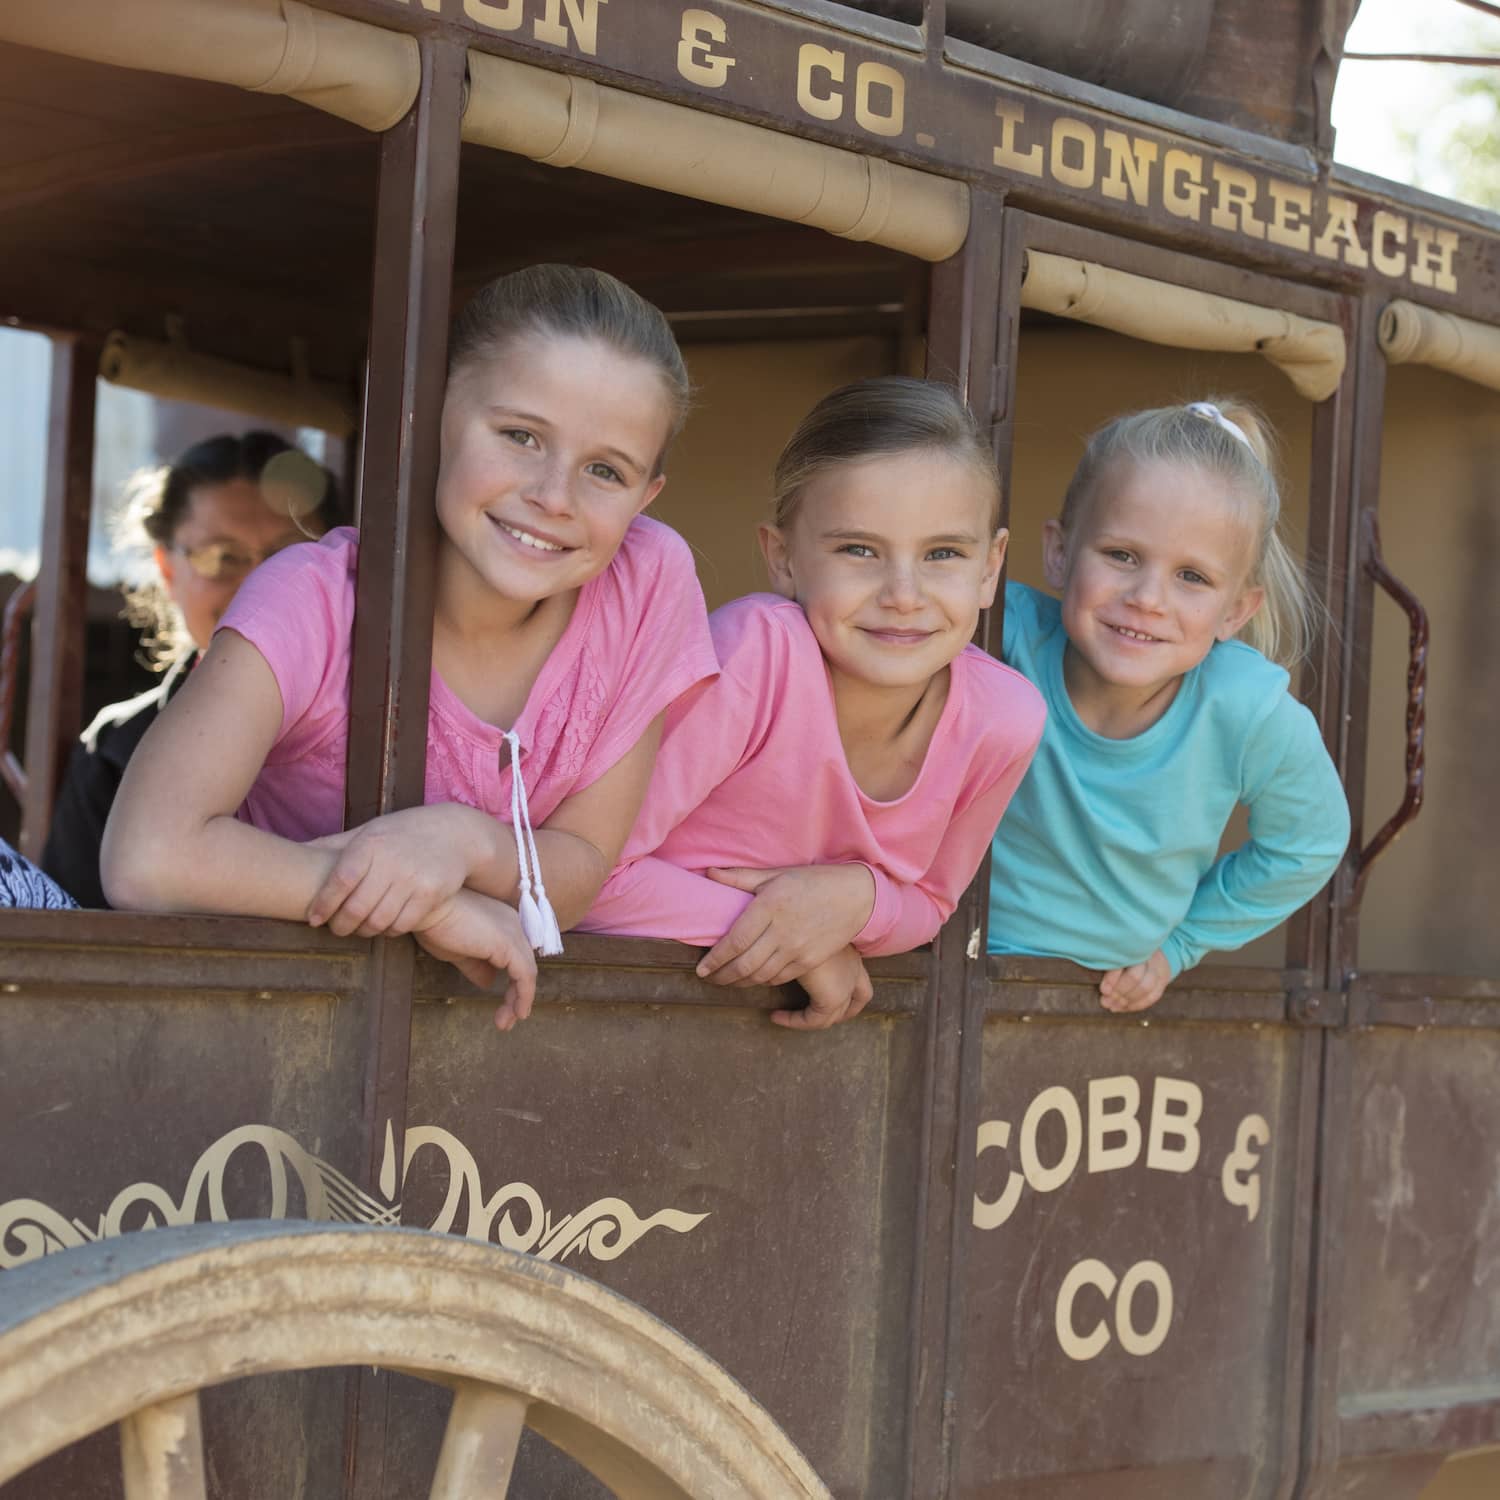 Three young girls smiling and leaning out the open window of a Cobb and Co Stagecoach